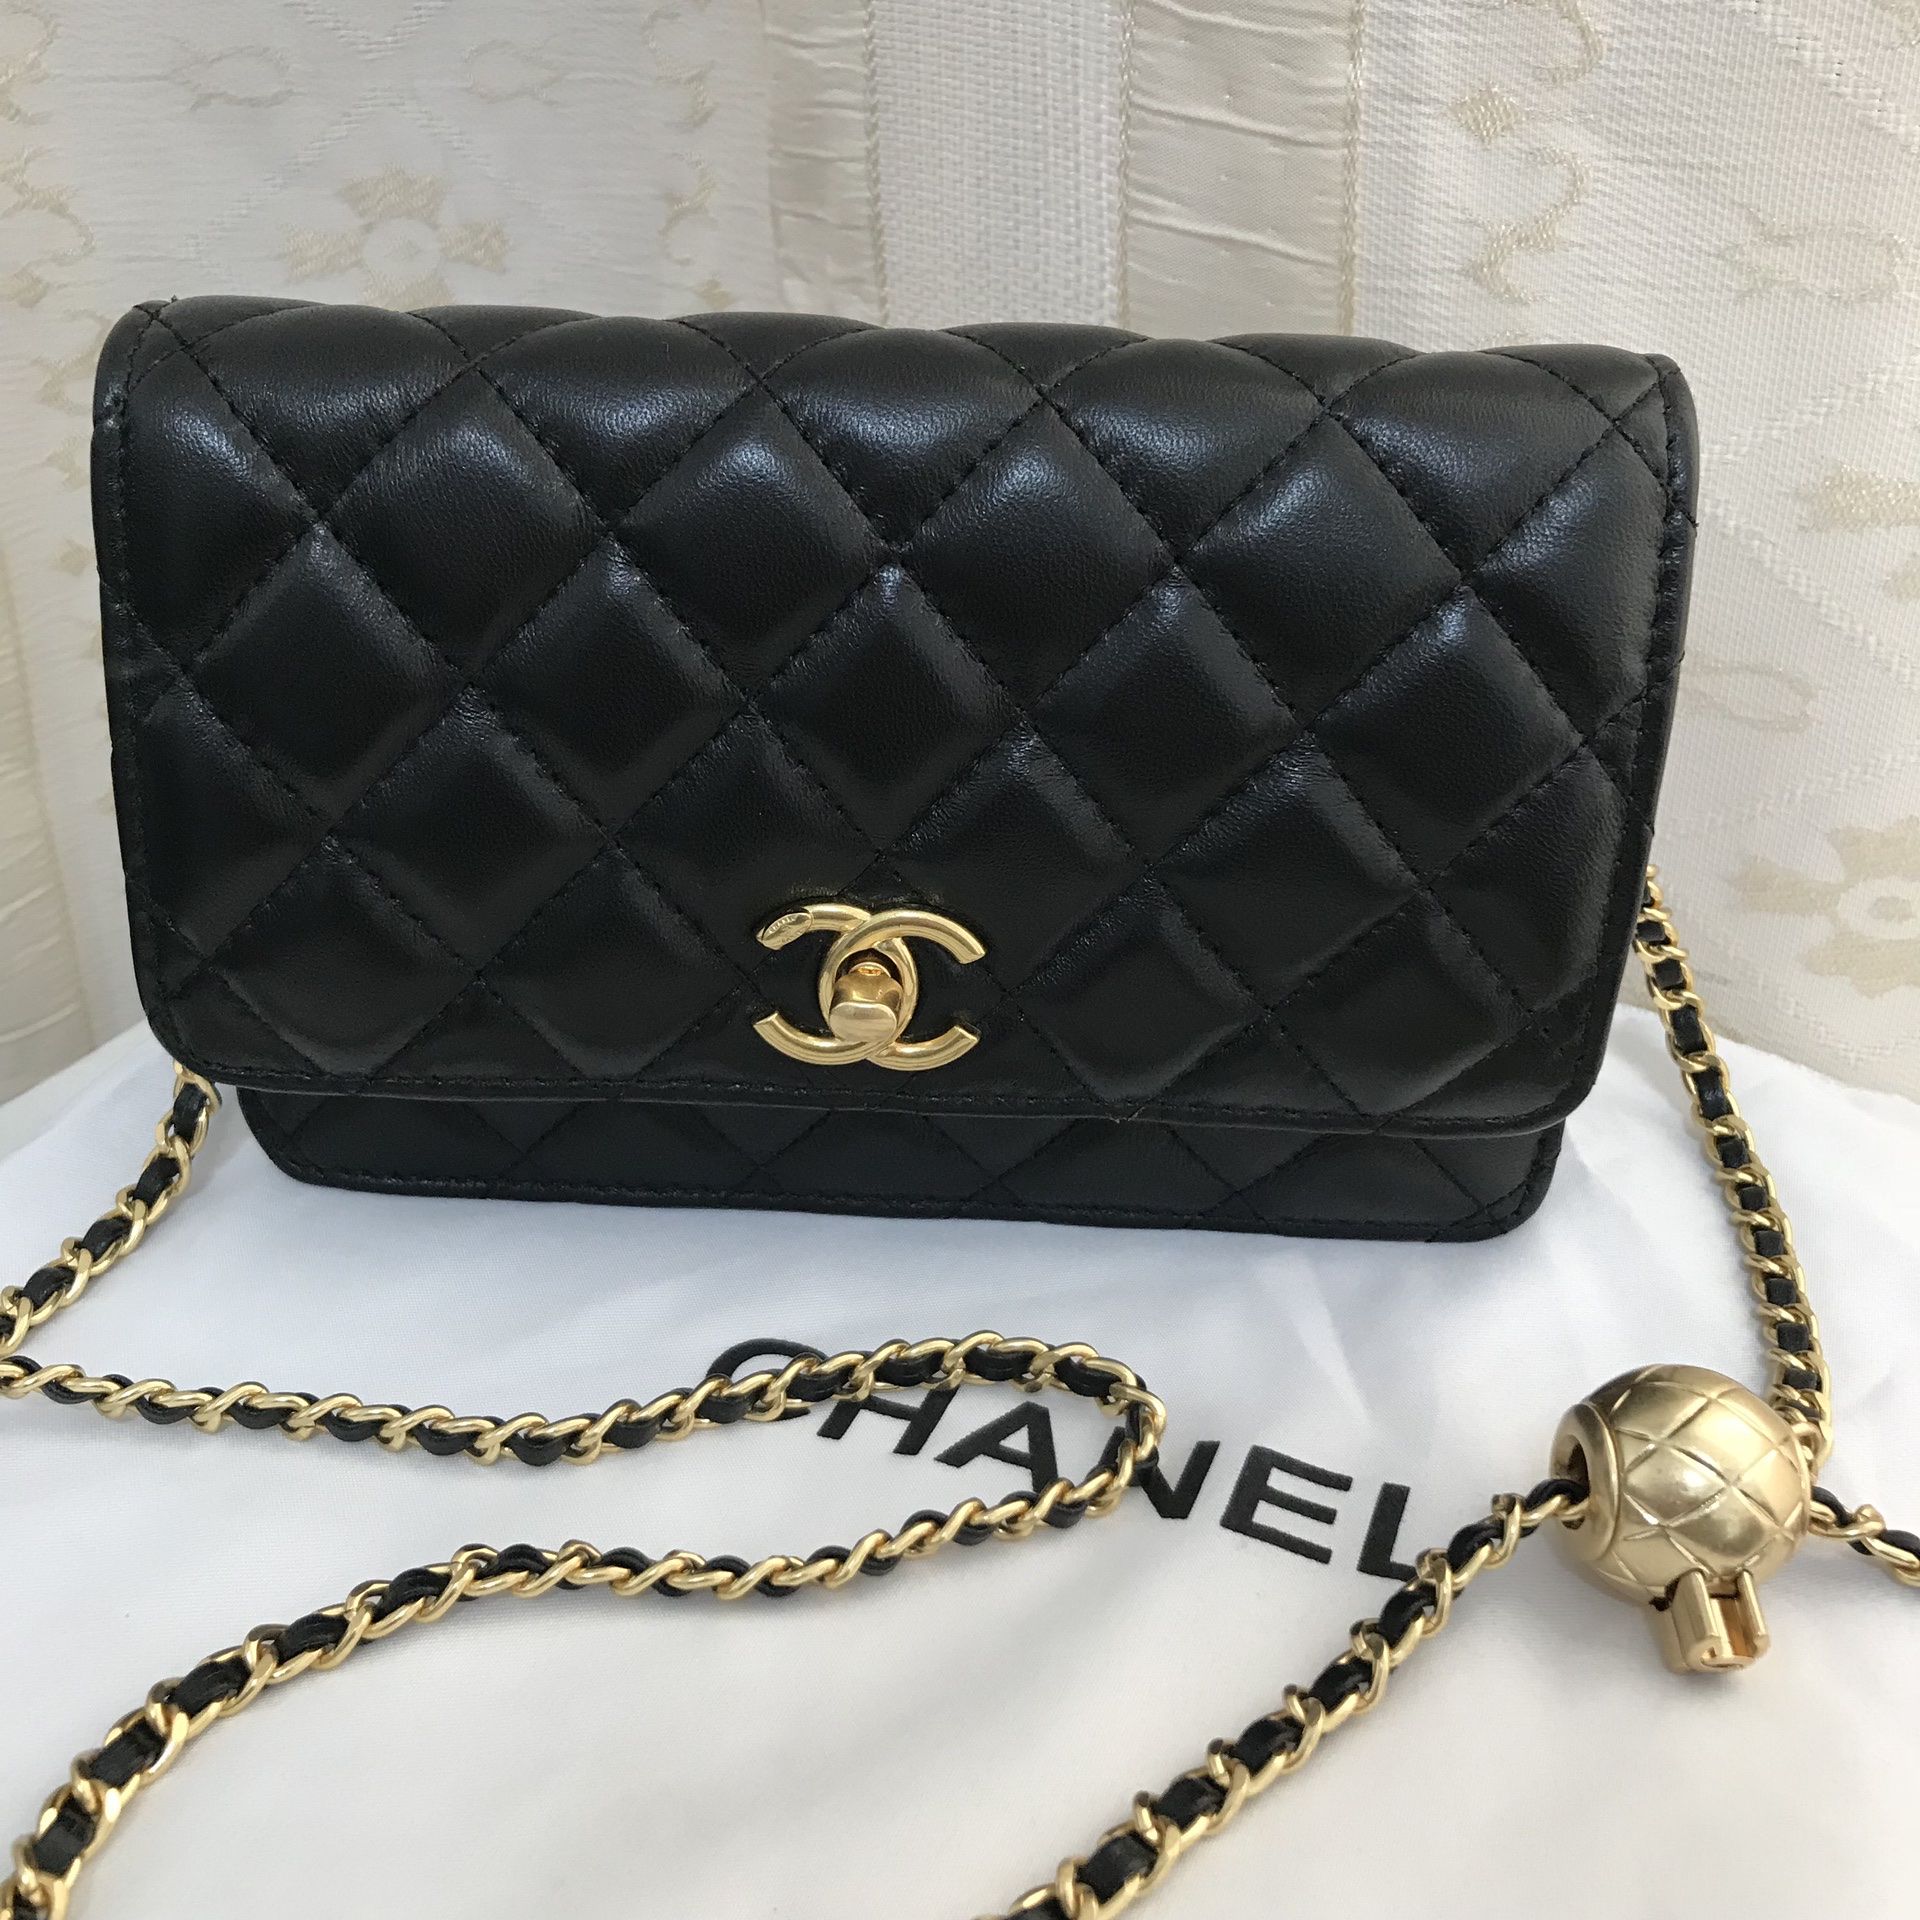 chain for chanel bag